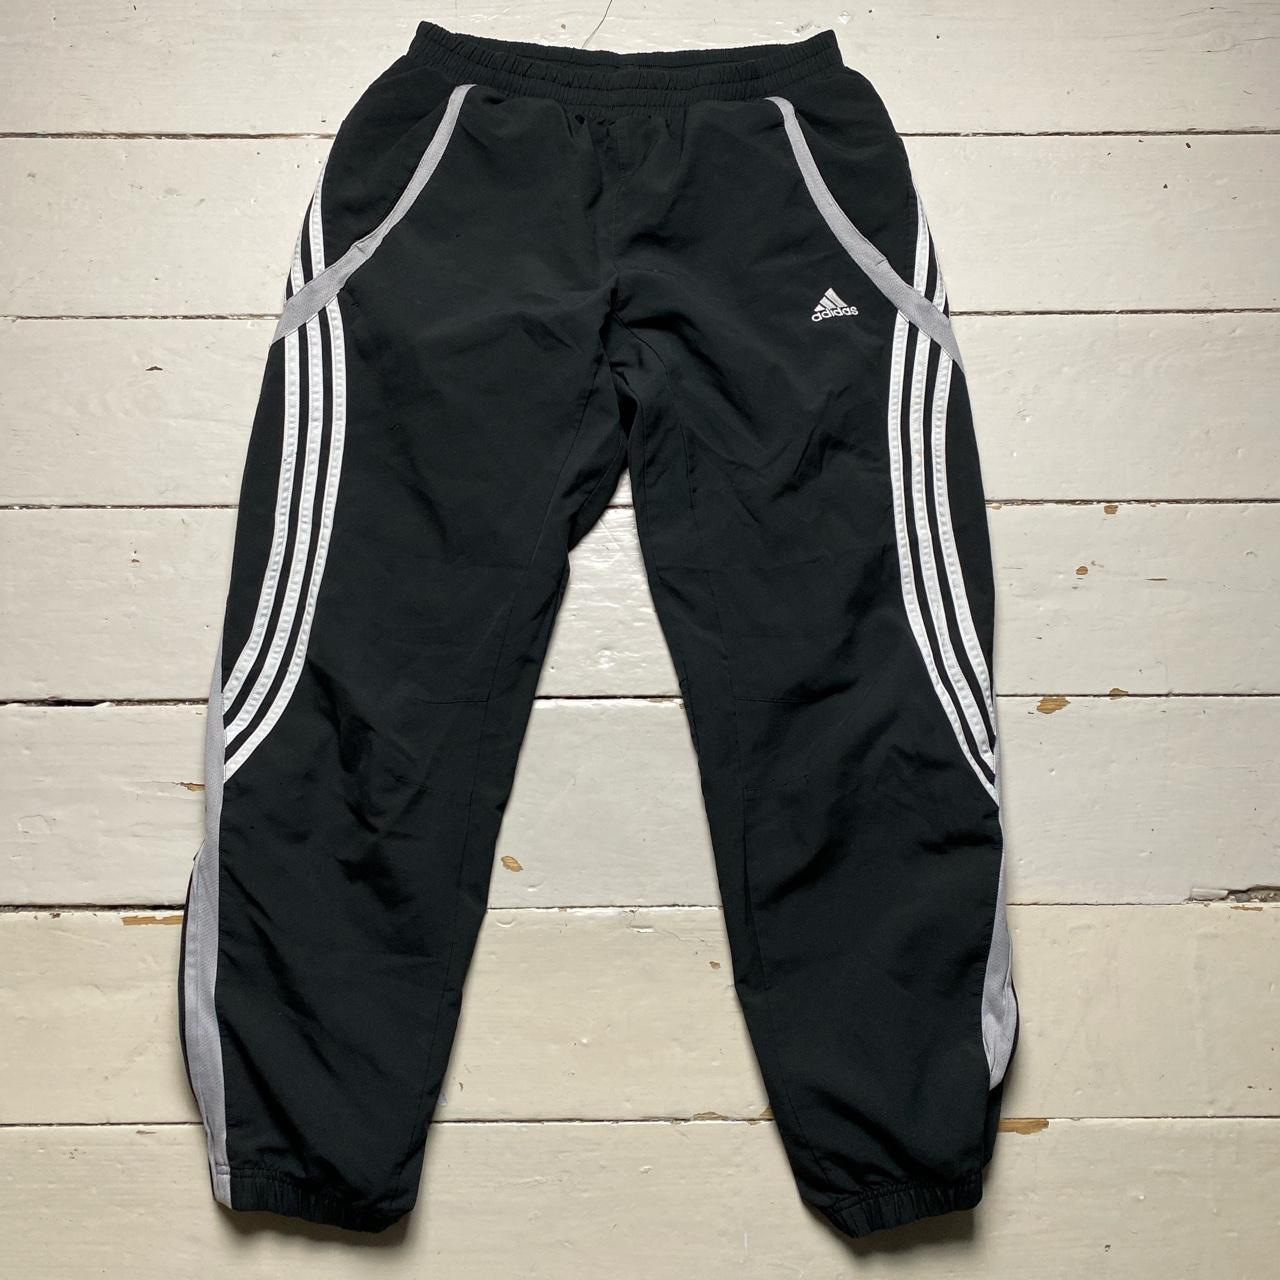 Adidas Vintage Baggy Black and White Shell Bottoms